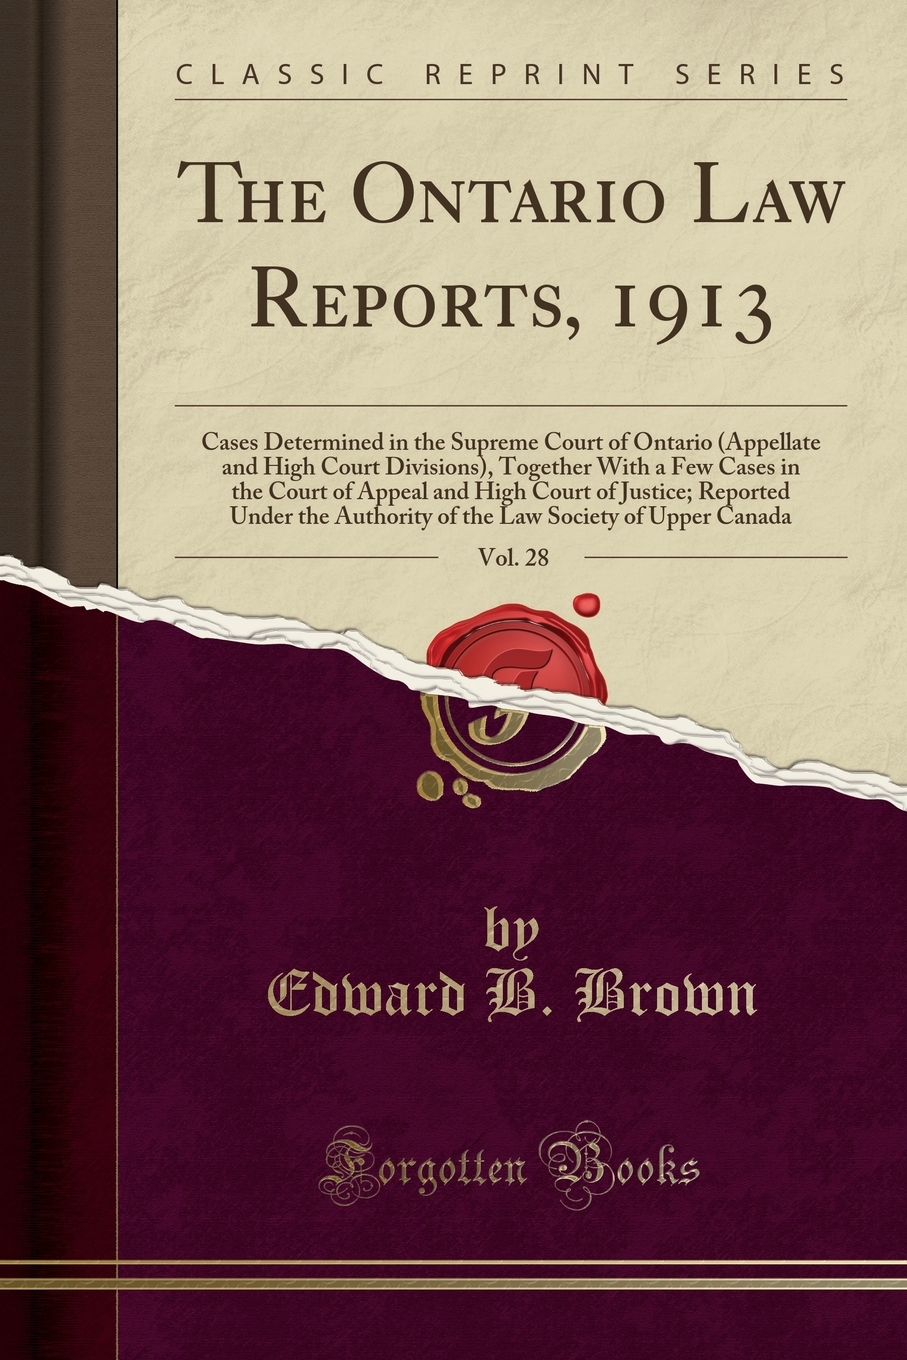 The Ontario Law Reports, 1913, Vol. 28 : Cases Determined in the Supreme Court of Ontario (Appellate and High Court Divisions), Together with a Few Cases in the Court of Appeal and High Court of Justice; Reported Under the Authority of the Law Society of U - image 1 of 1